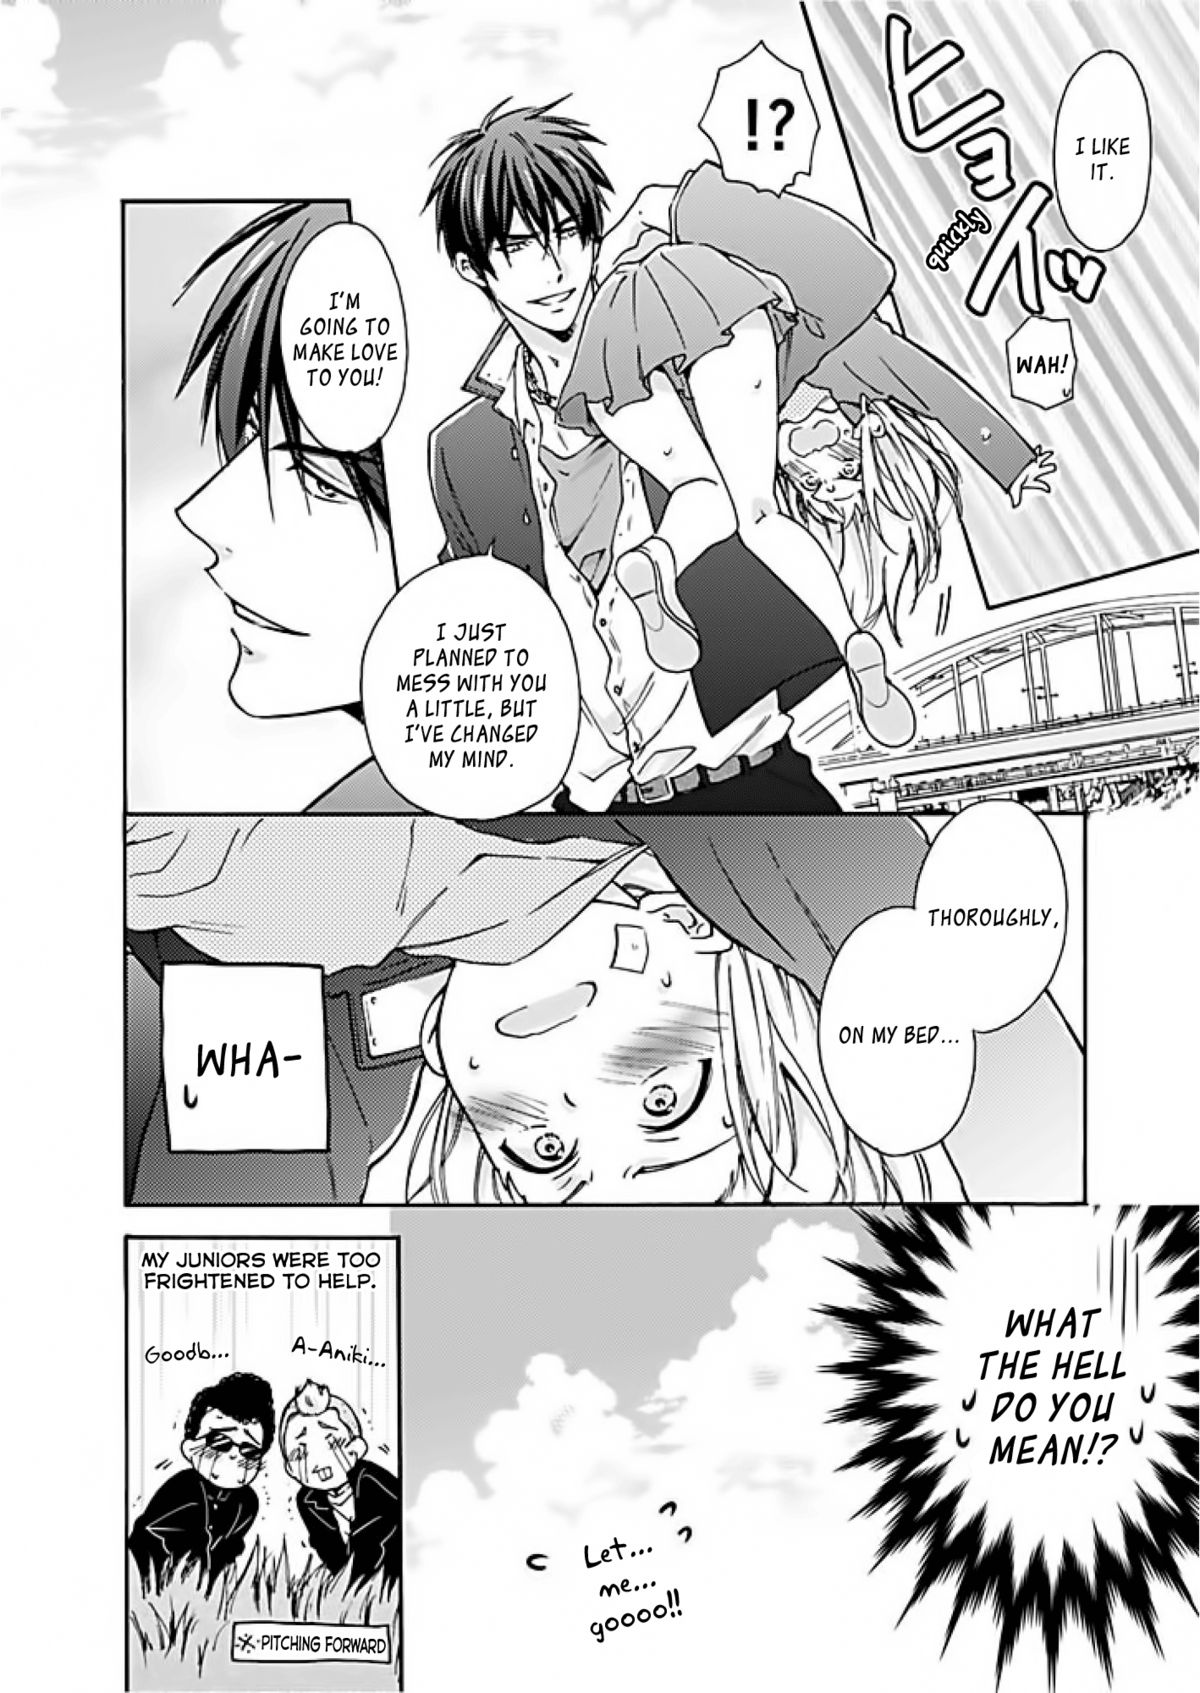 [Takao Yori] Genderbender Yankee School ☆ They're Trying to Take My First Time. [English] page 9 full